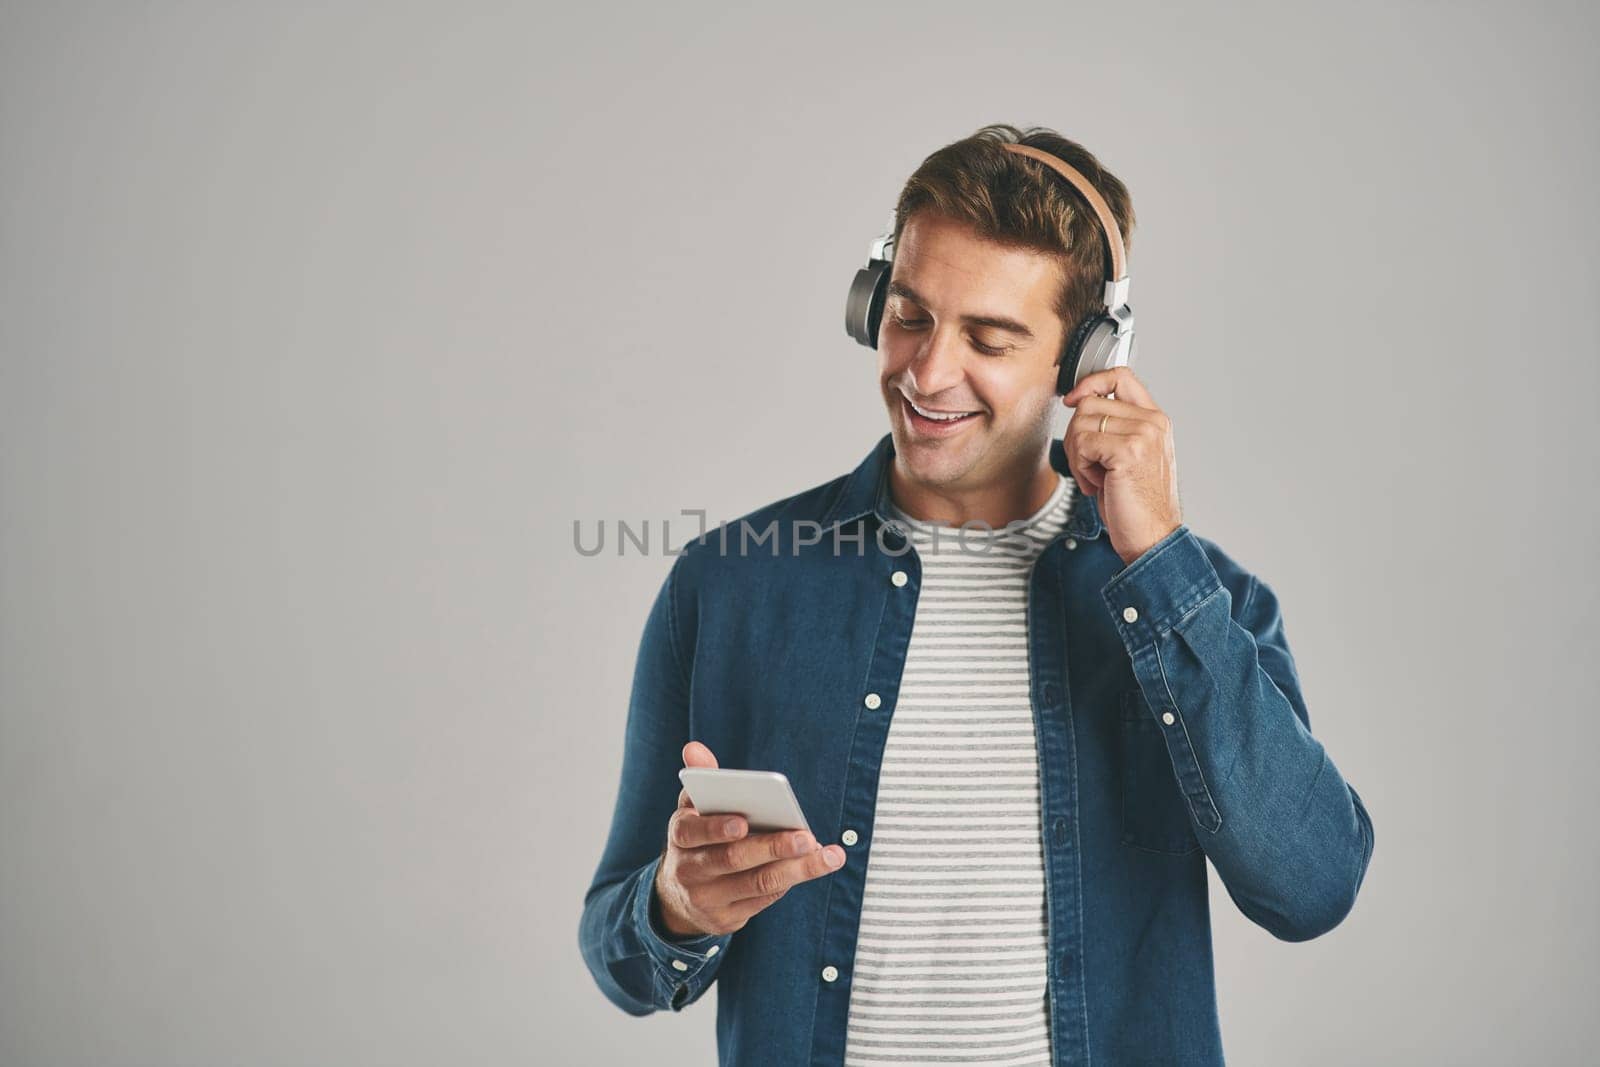 This music suits my taste. Studio shot of a young man using a cellphone while listening to music against a grey background. by YuriArcurs